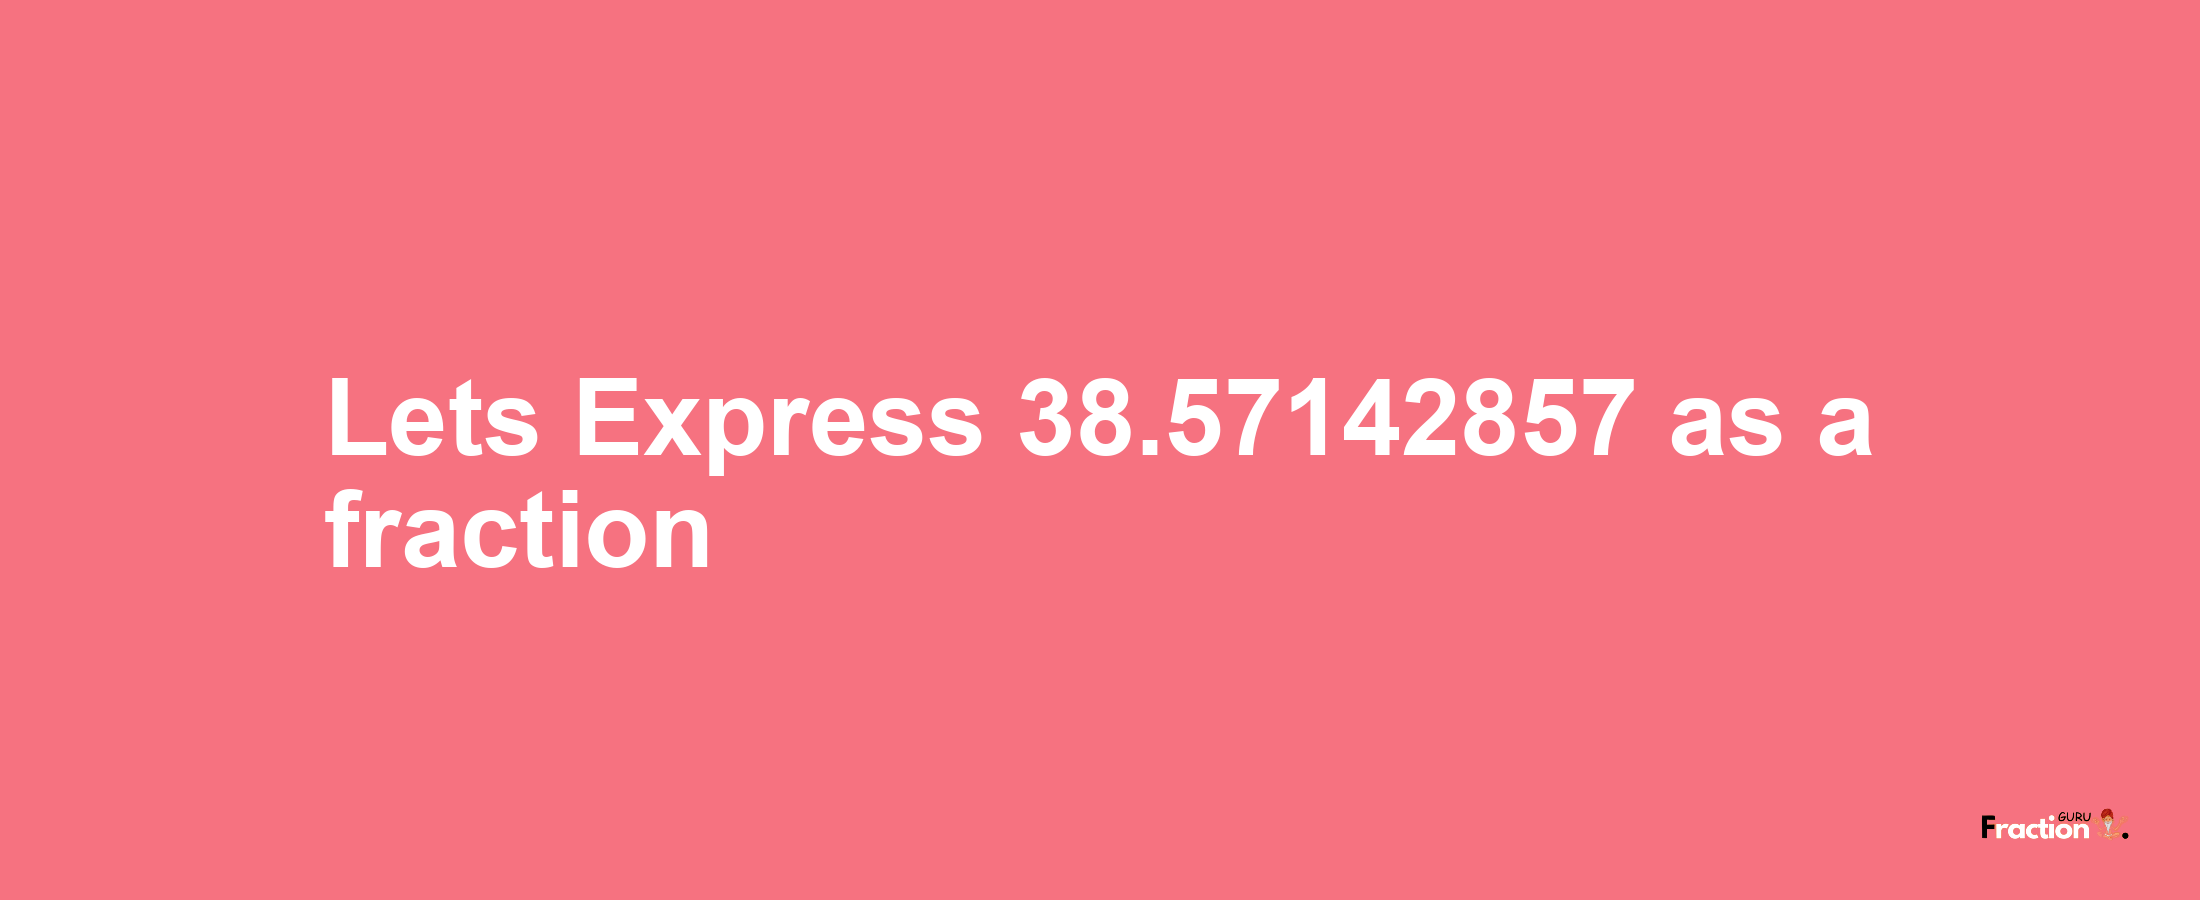 Lets Express 38.57142857 as afraction